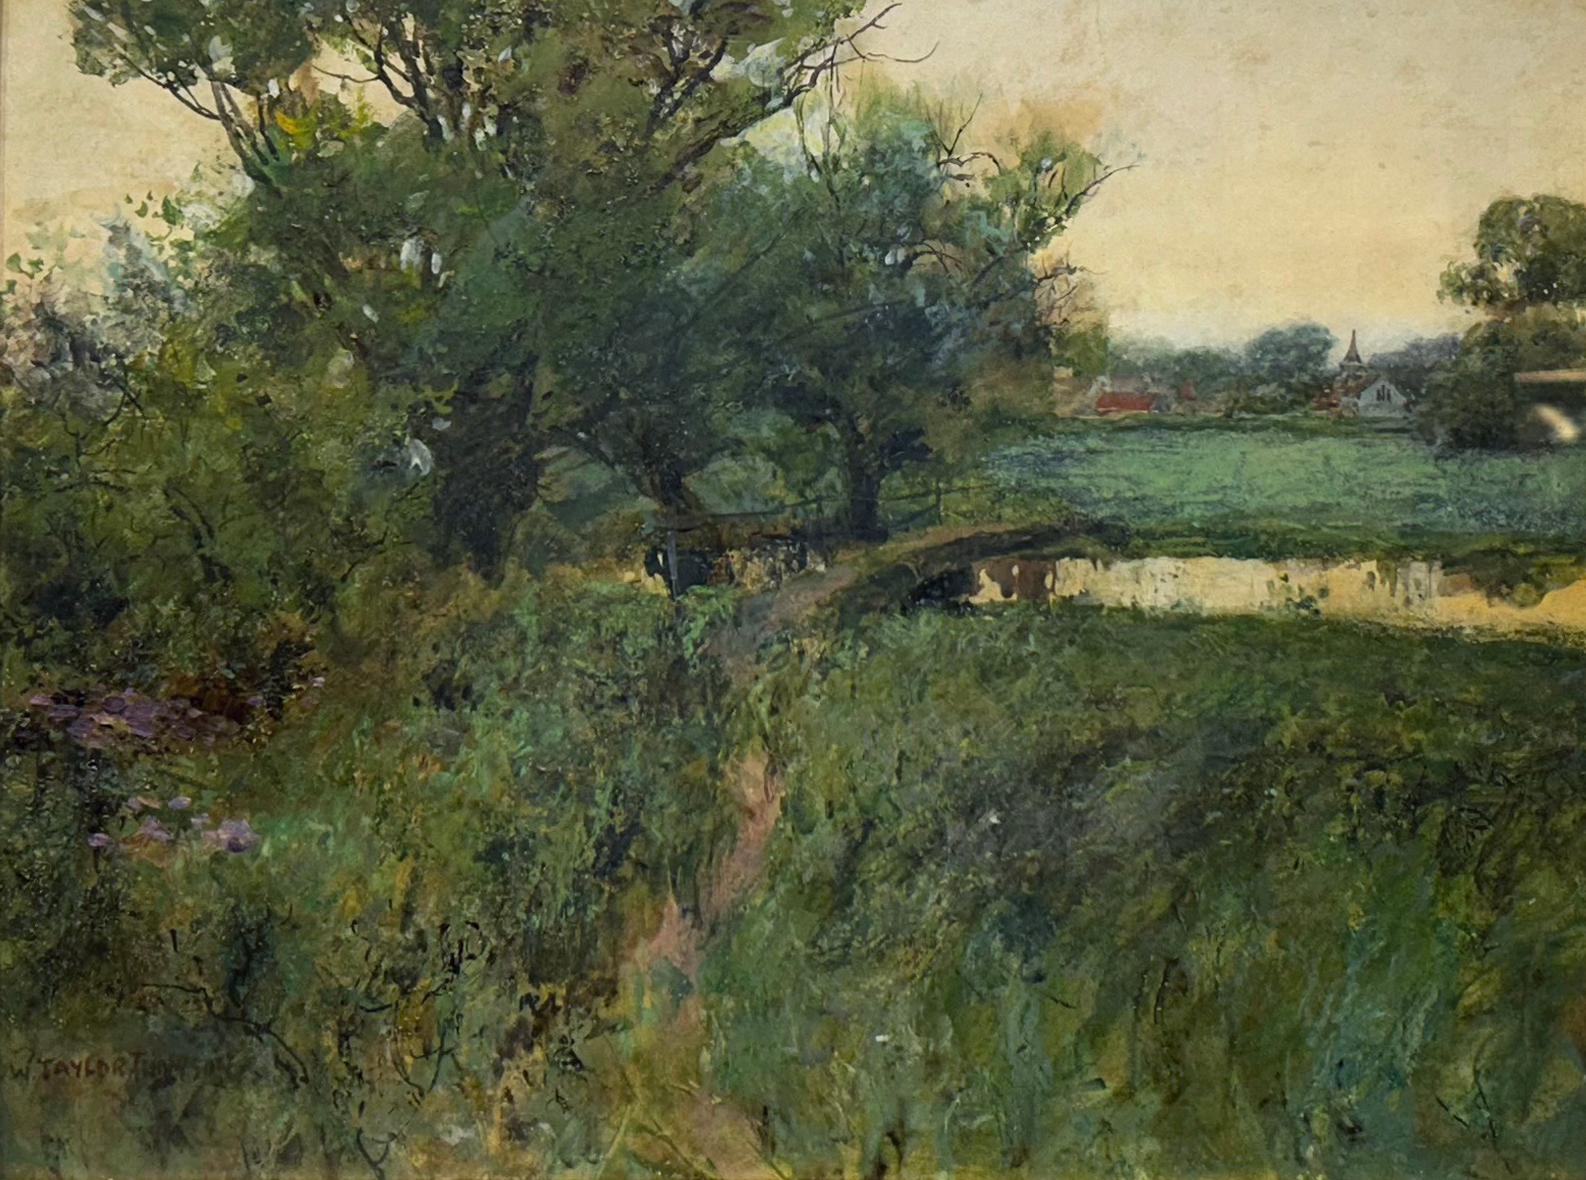 Summertime River Landscape by 19th century American Impressionist - Painting by William Taylor Thomson